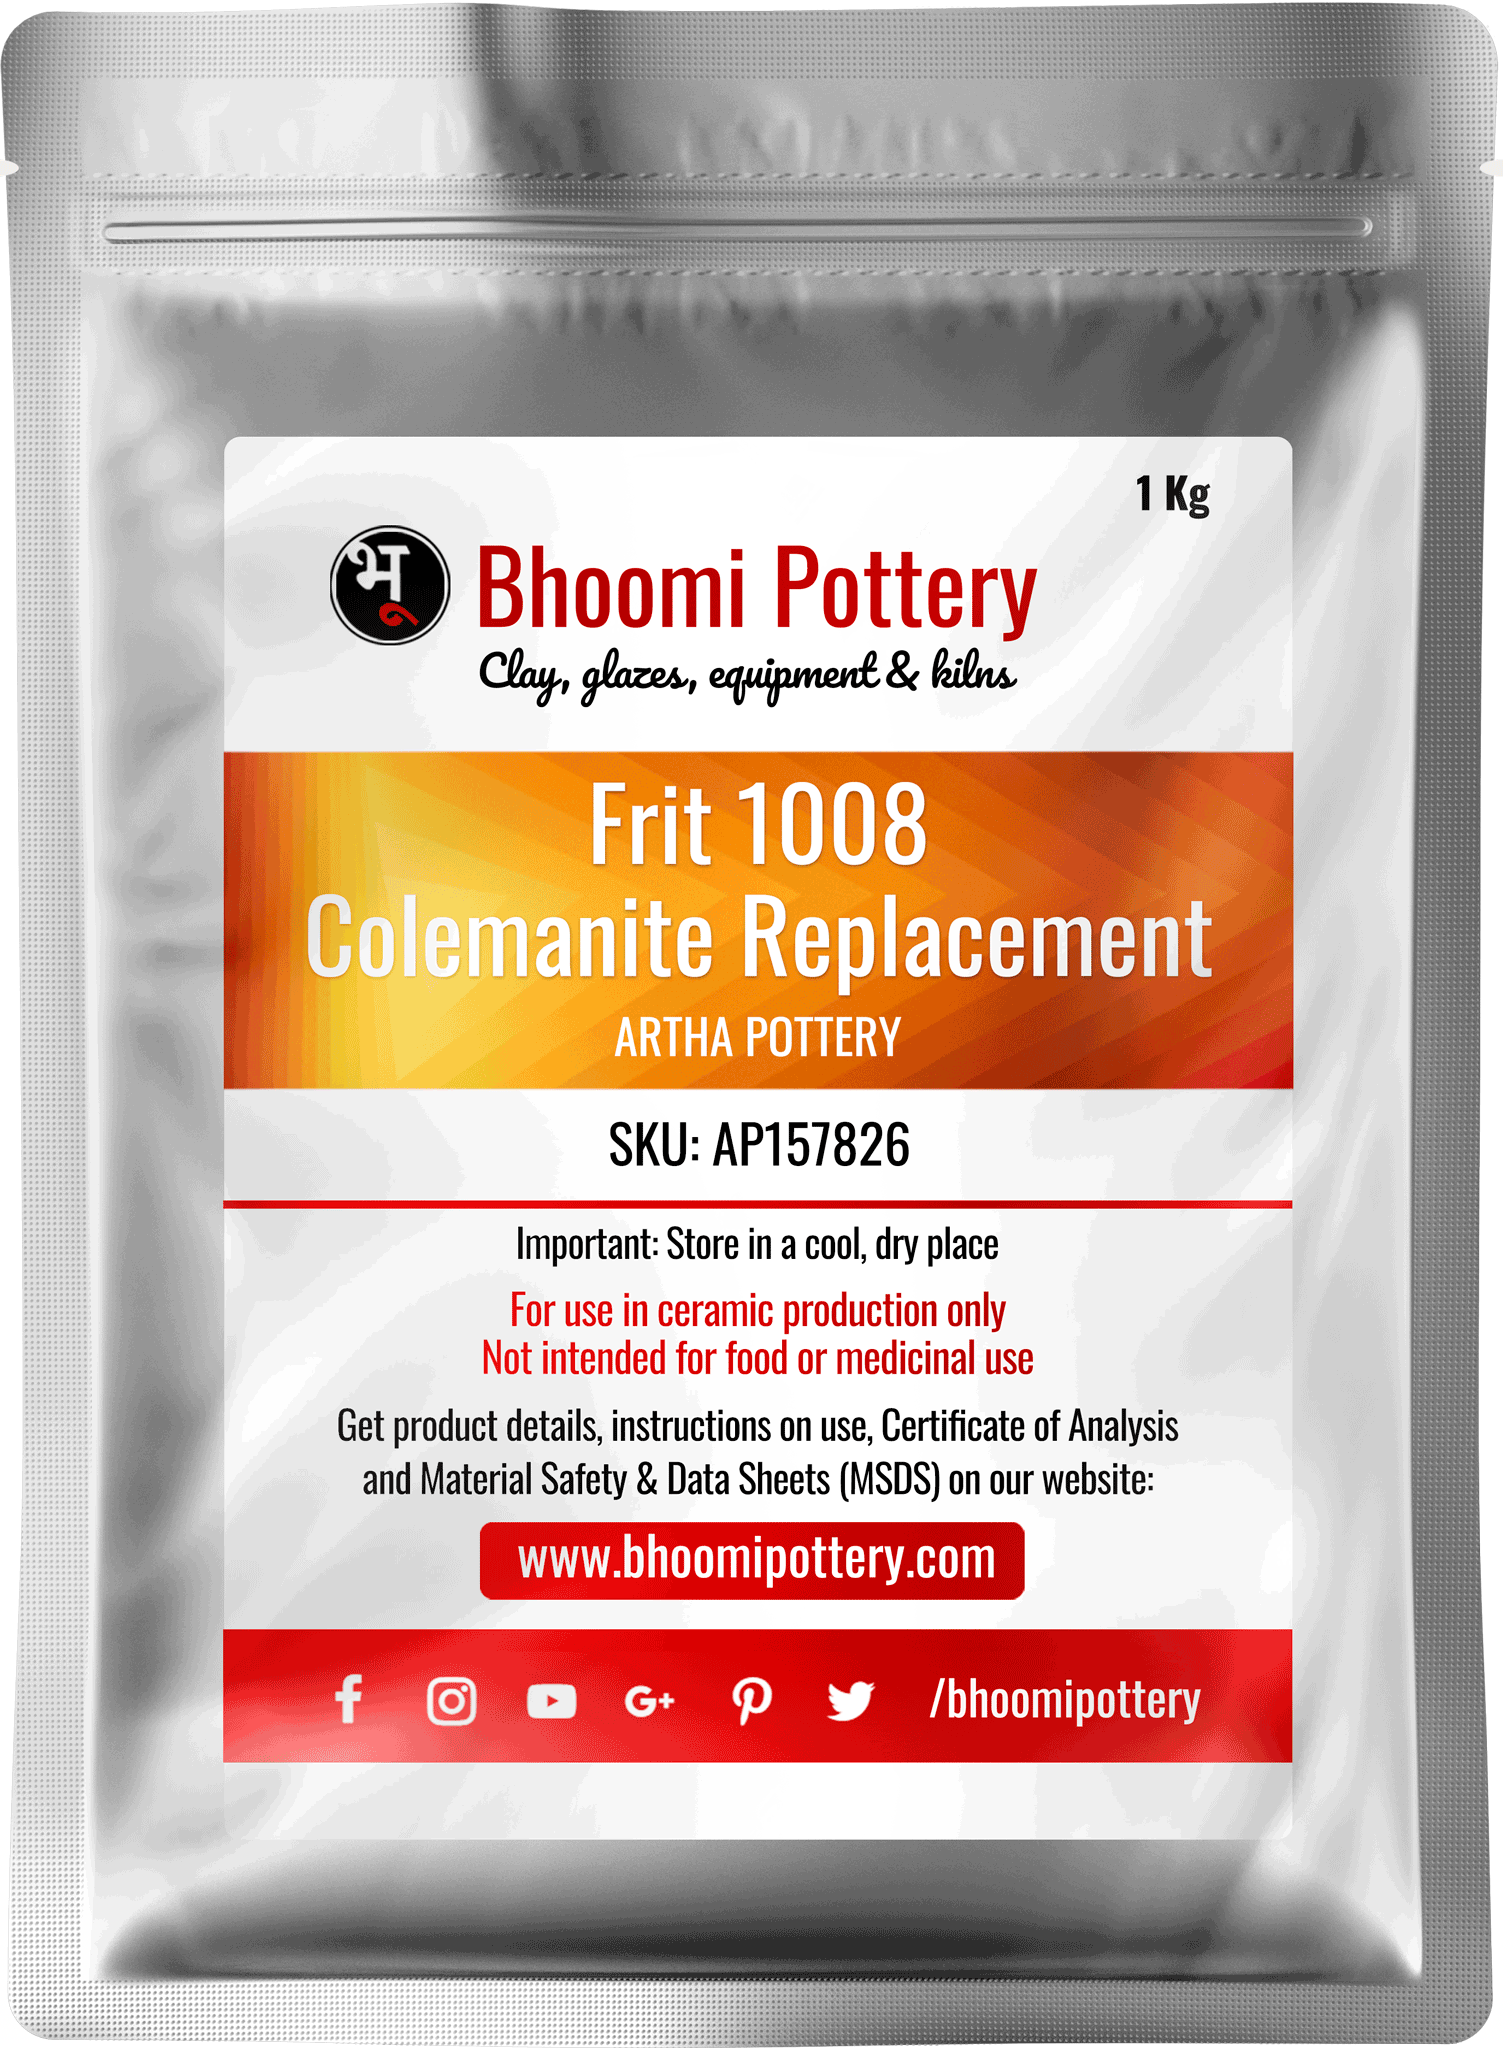 Artha Pottery Frit 1008 Colemanite Replacement 1 Kg for sale in India - Bhoomi Pottery